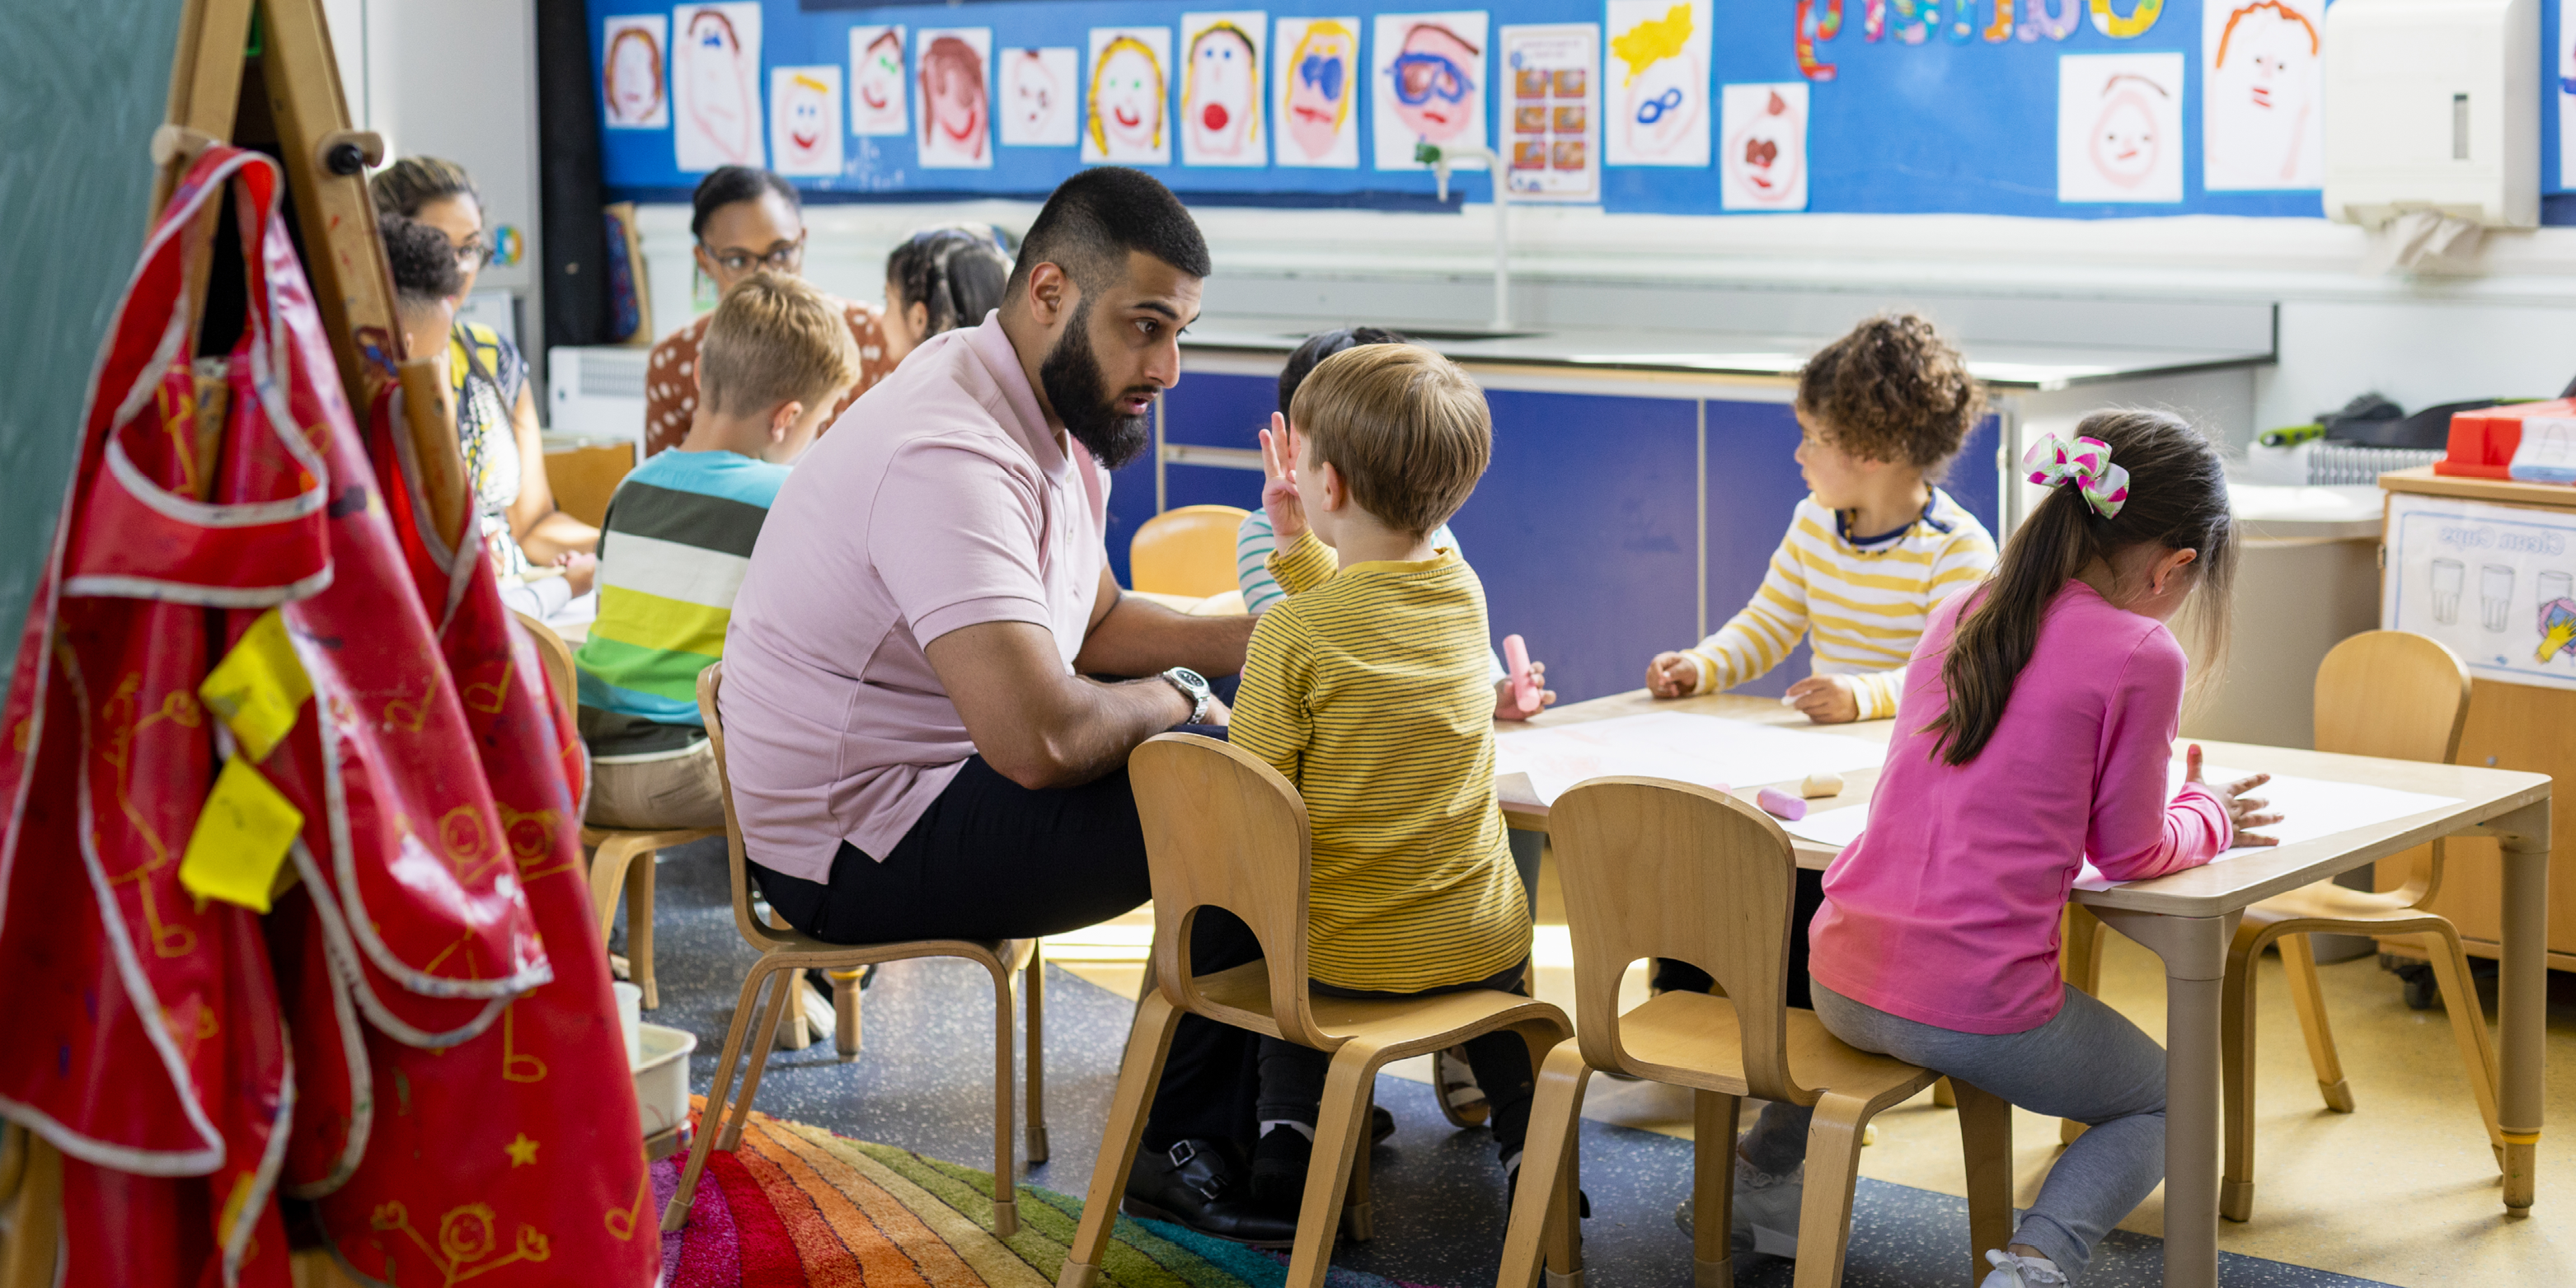 EYFS teacher works with young children in the classroom